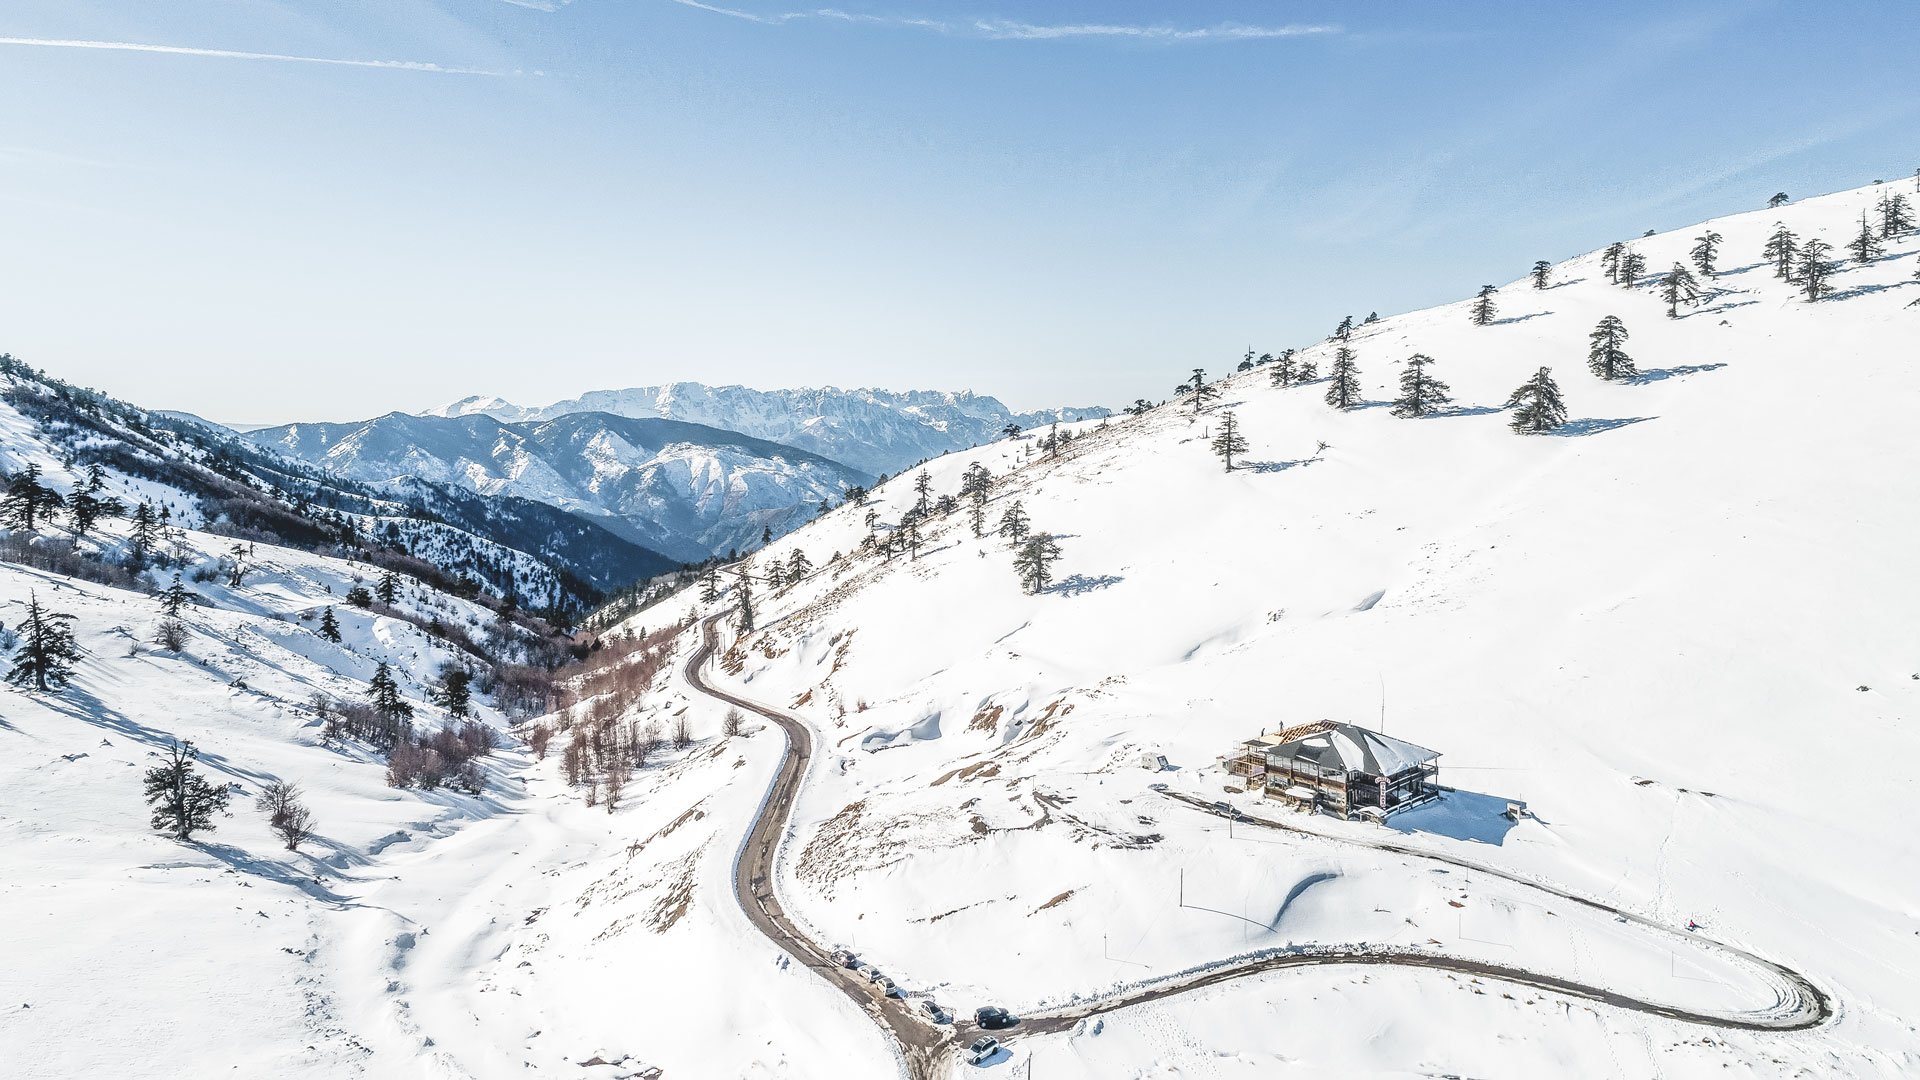 In Vasilitsa, you’ll be treated to all the comforts of a modern winter sports centre, including après